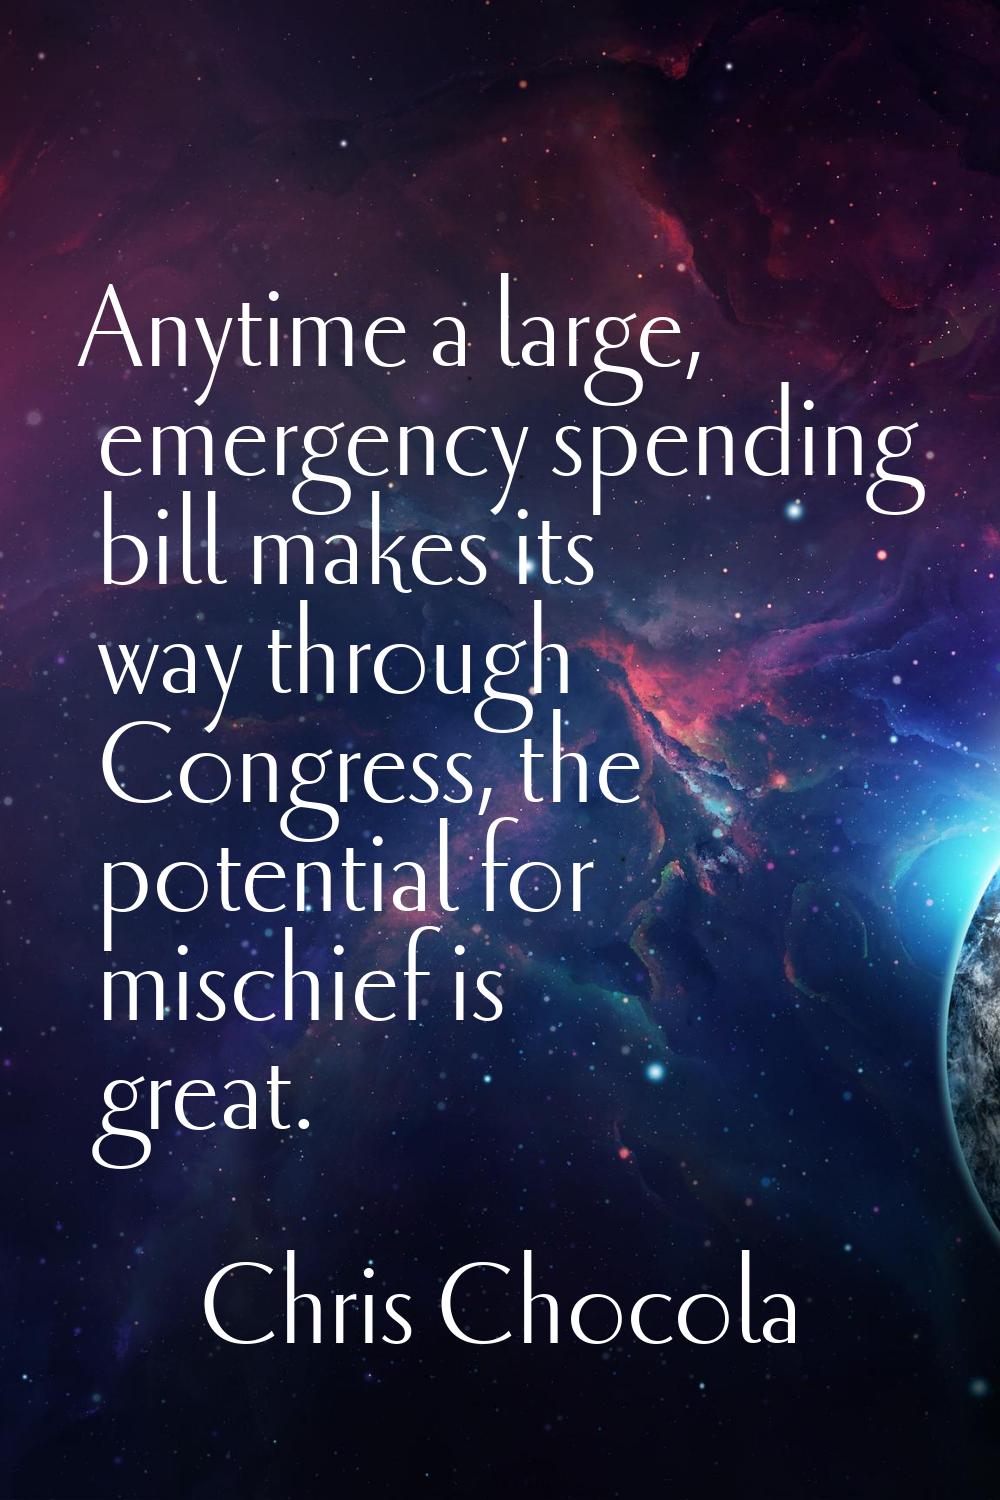 Anytime a large, emergency spending bill makes its way through Congress, the potential for mischief